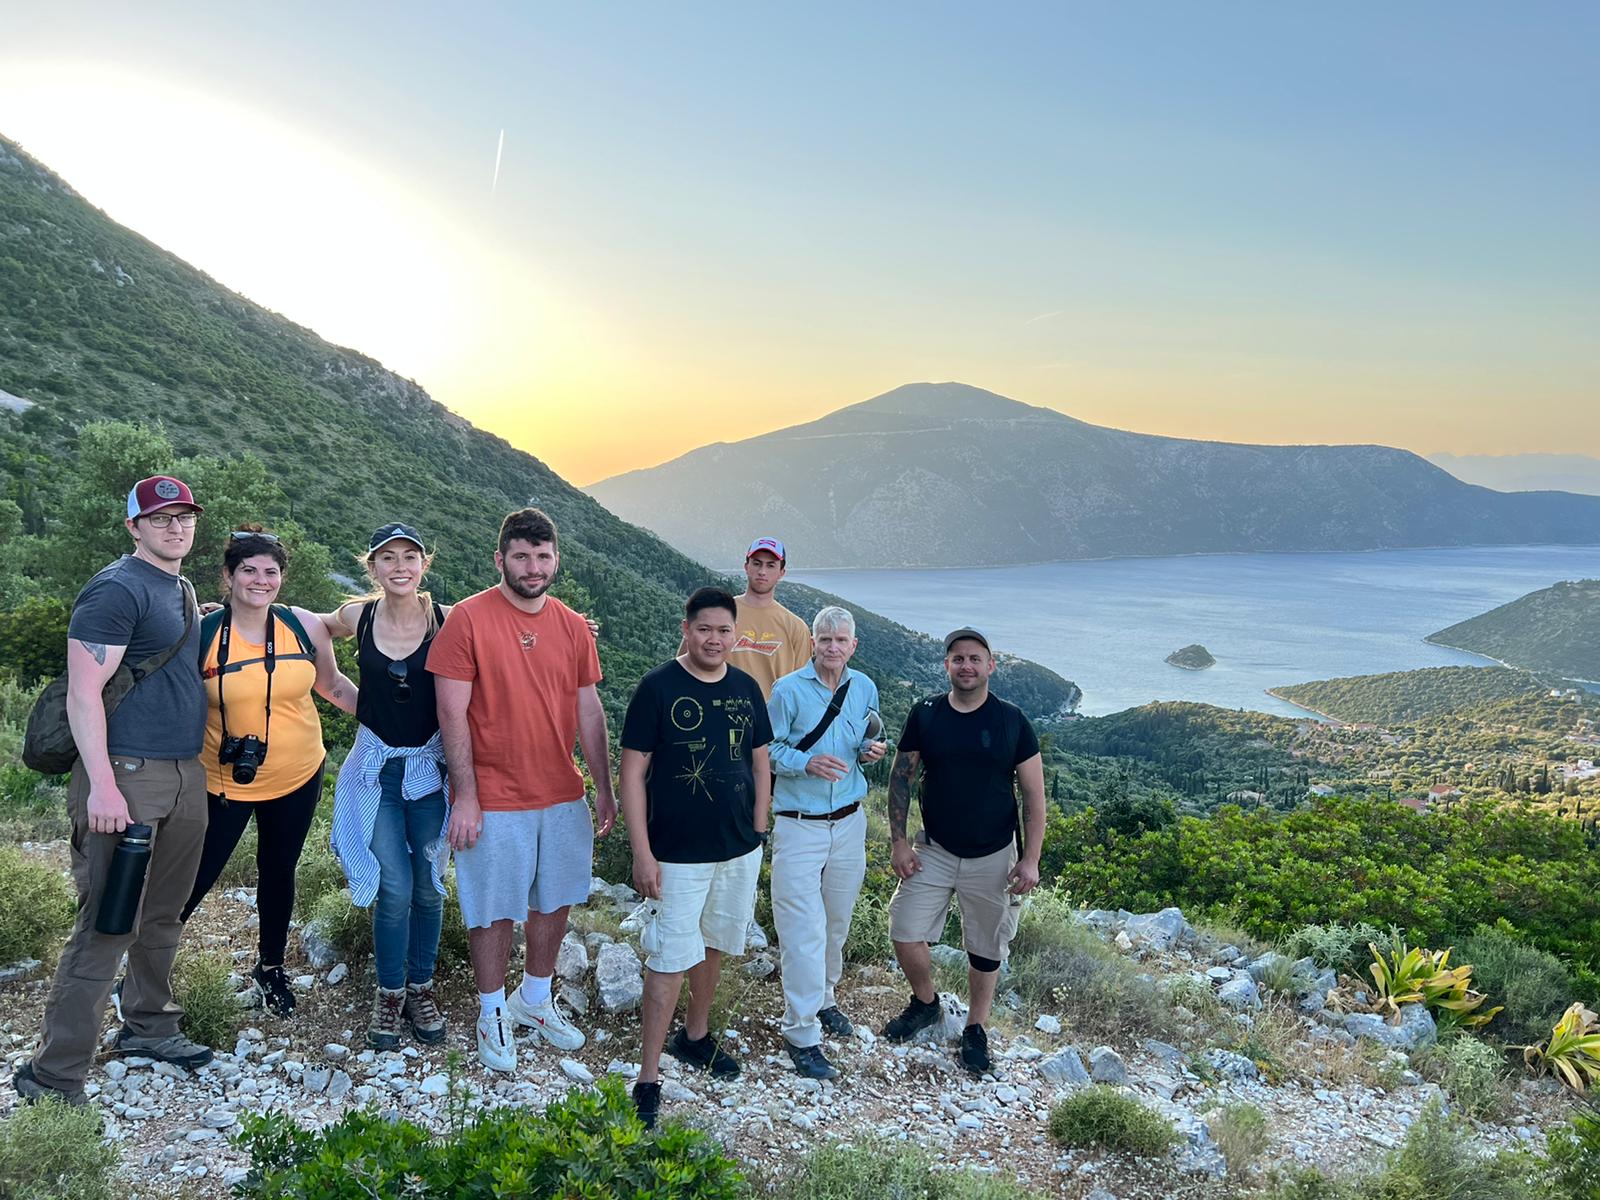 Students in Stockton's Worlds of Homer class, offered through the Military and Veteran Success Center, spent 11 days in Greece helping veteran students explore topics related to the war and their own military experience.